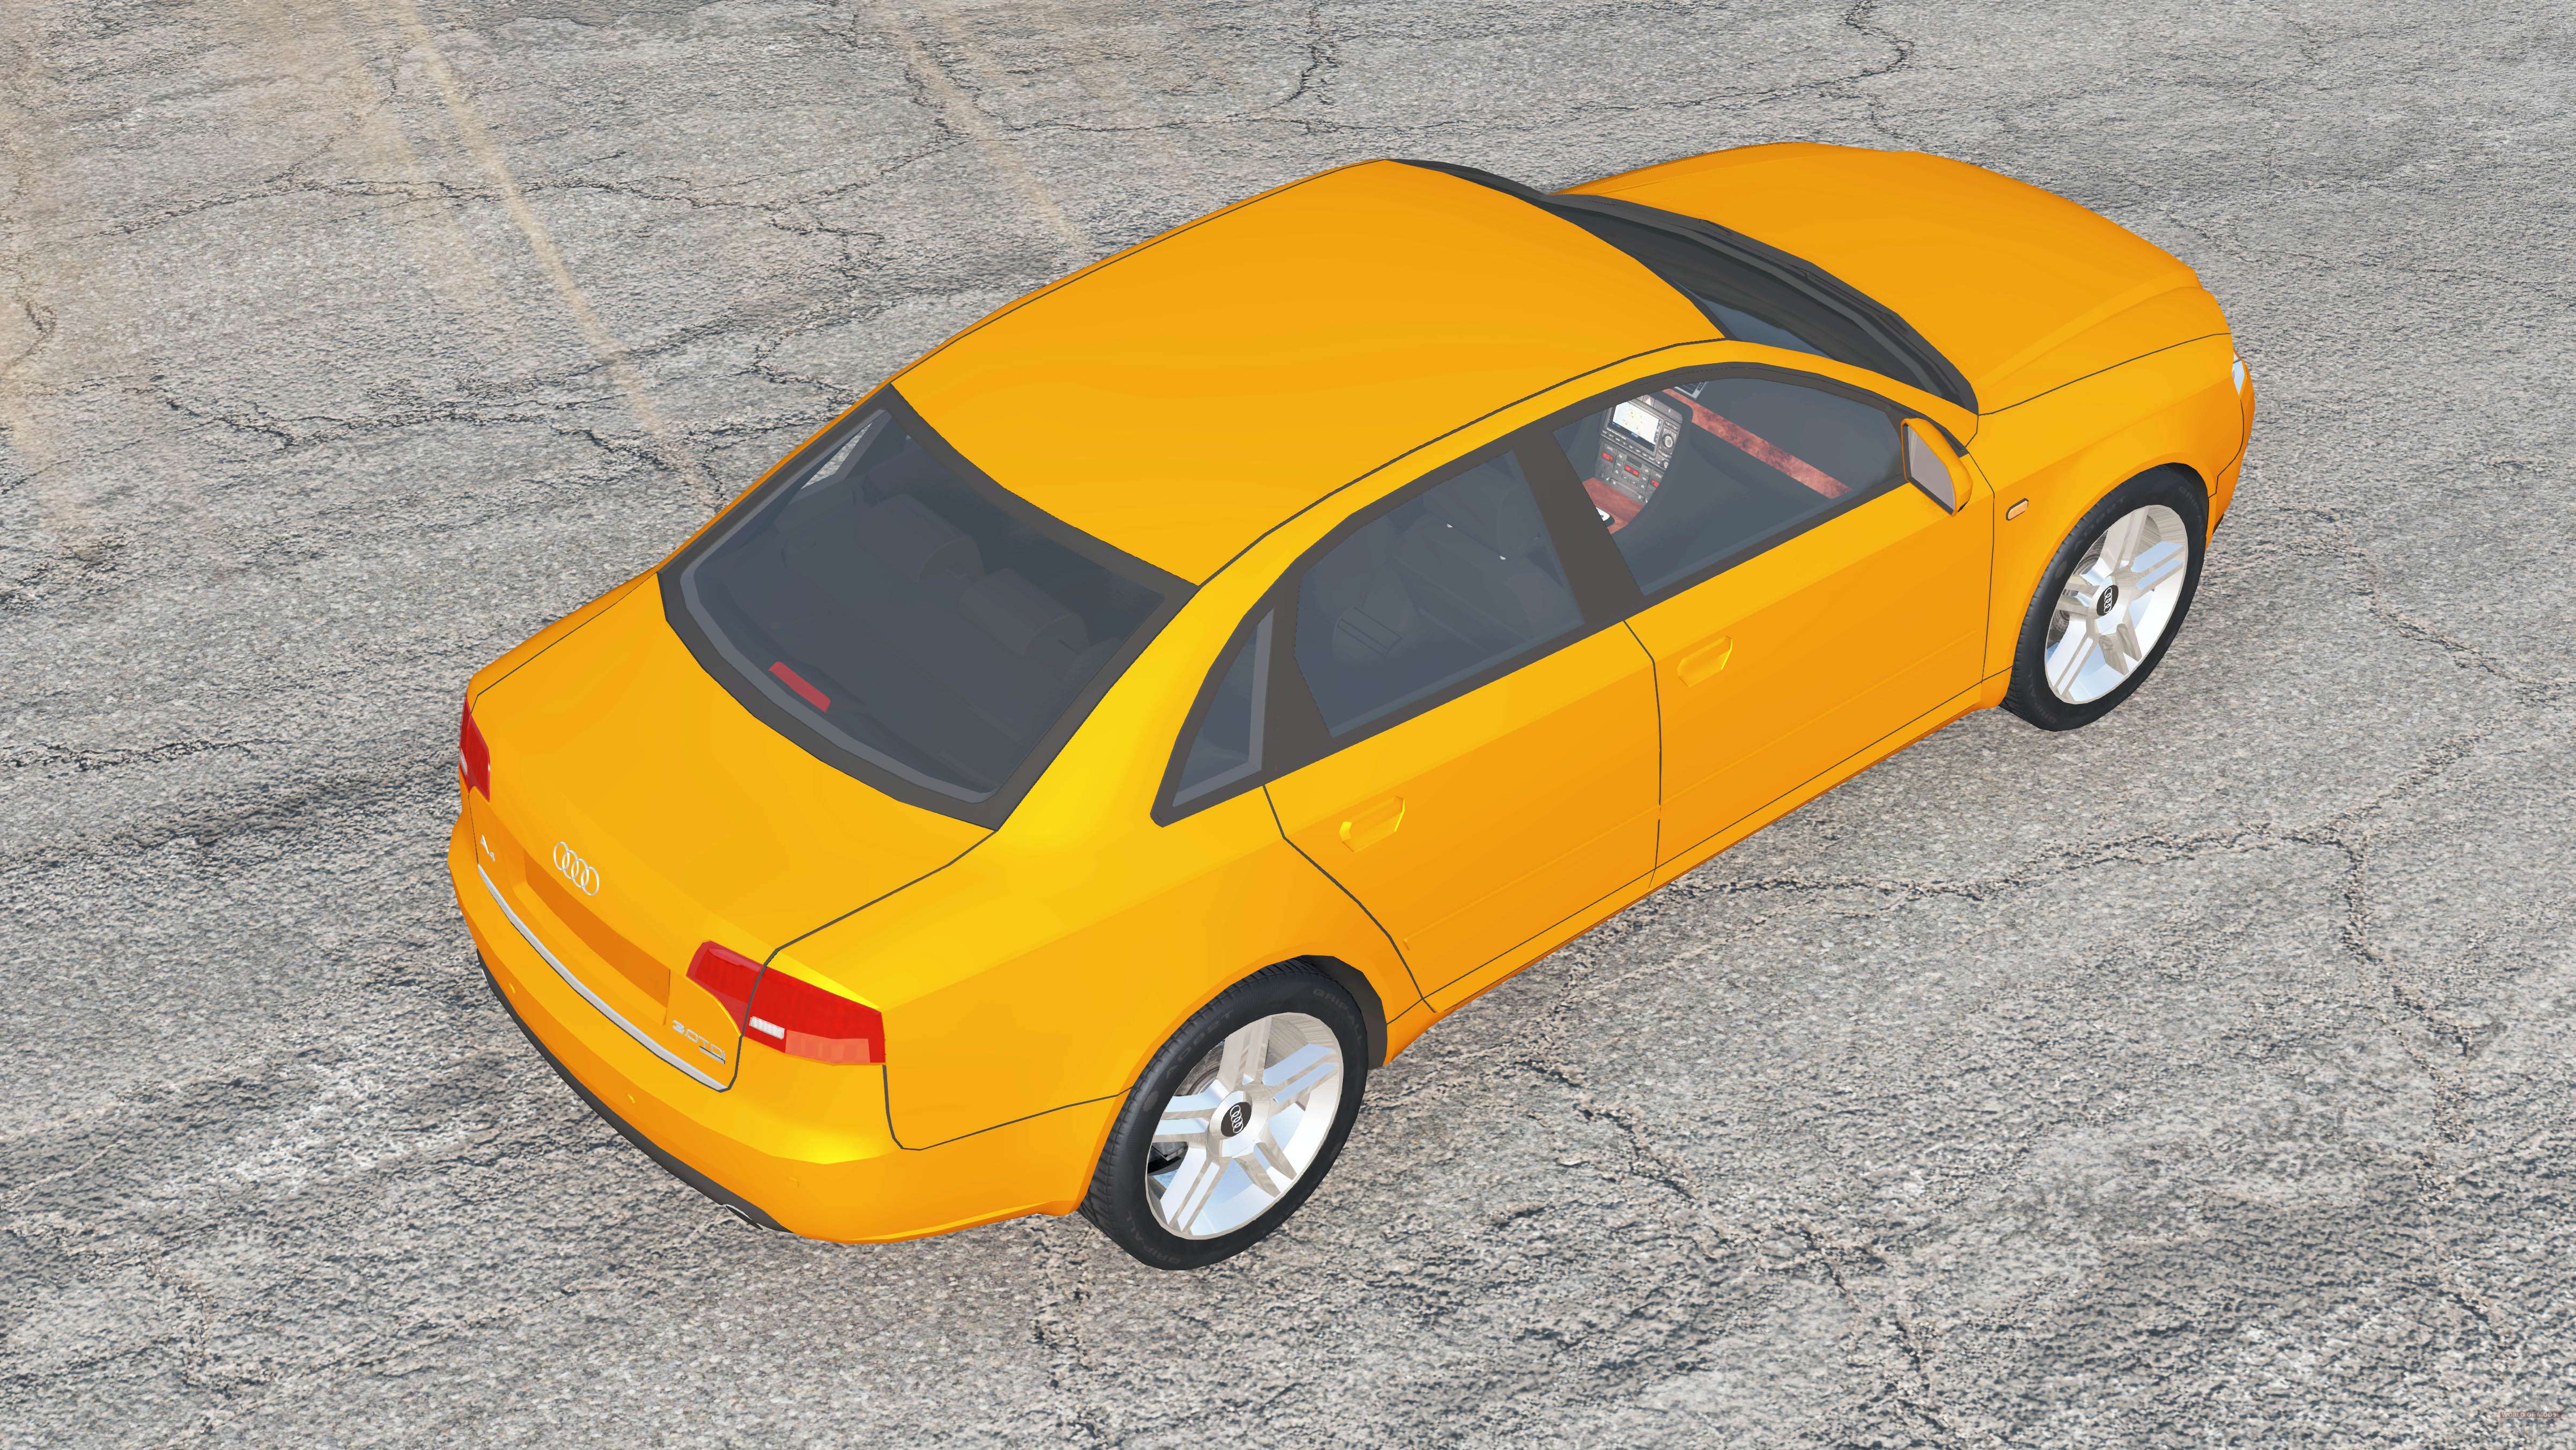 Audi A6 C6 New Version 1.1 - BeamNG.drive